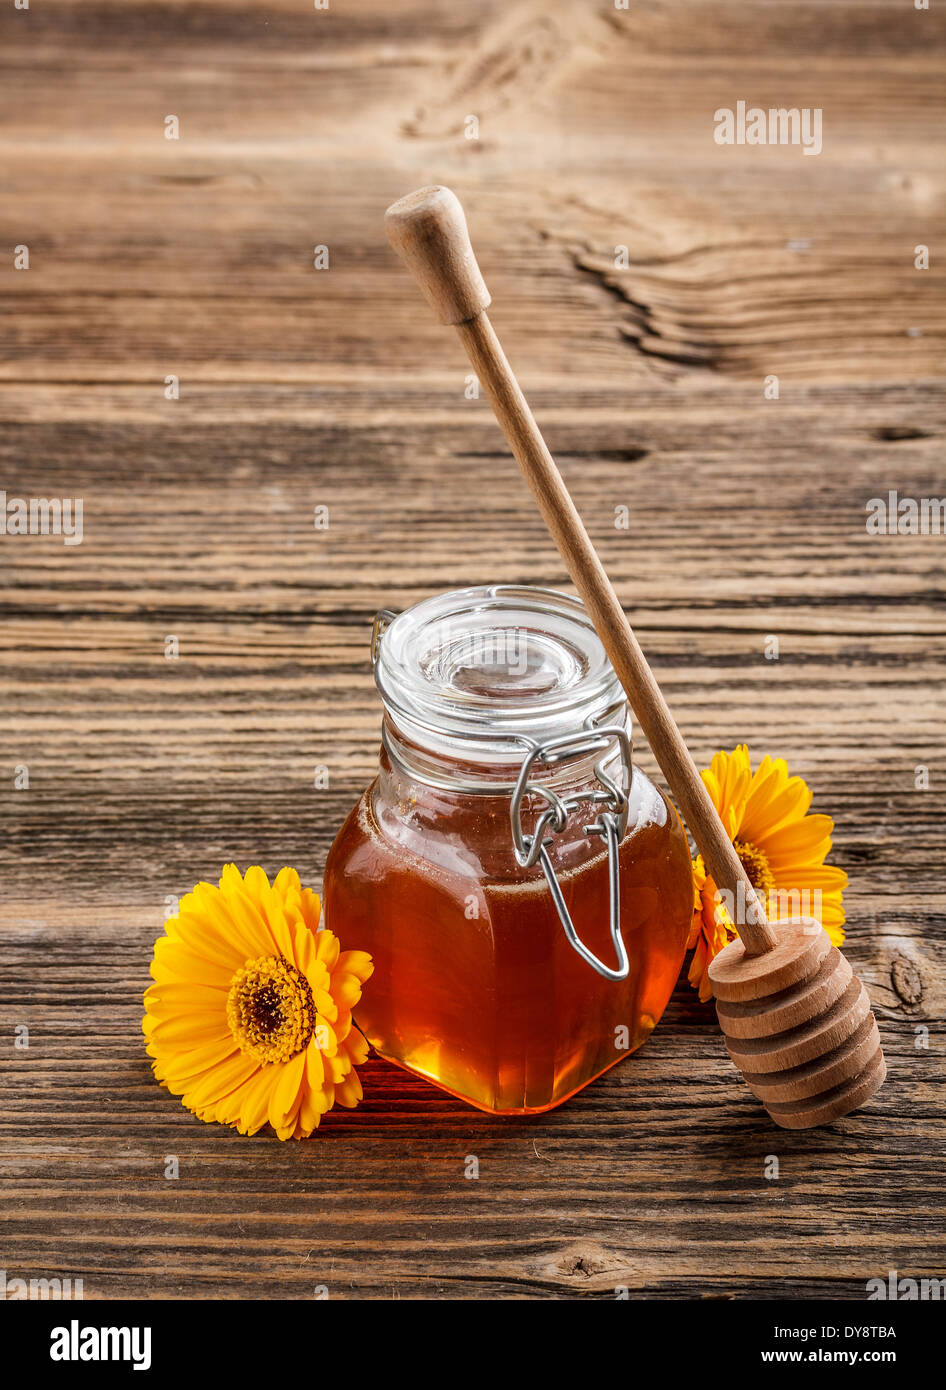 Honey with wood stick on vintage wooden background Stock Photo